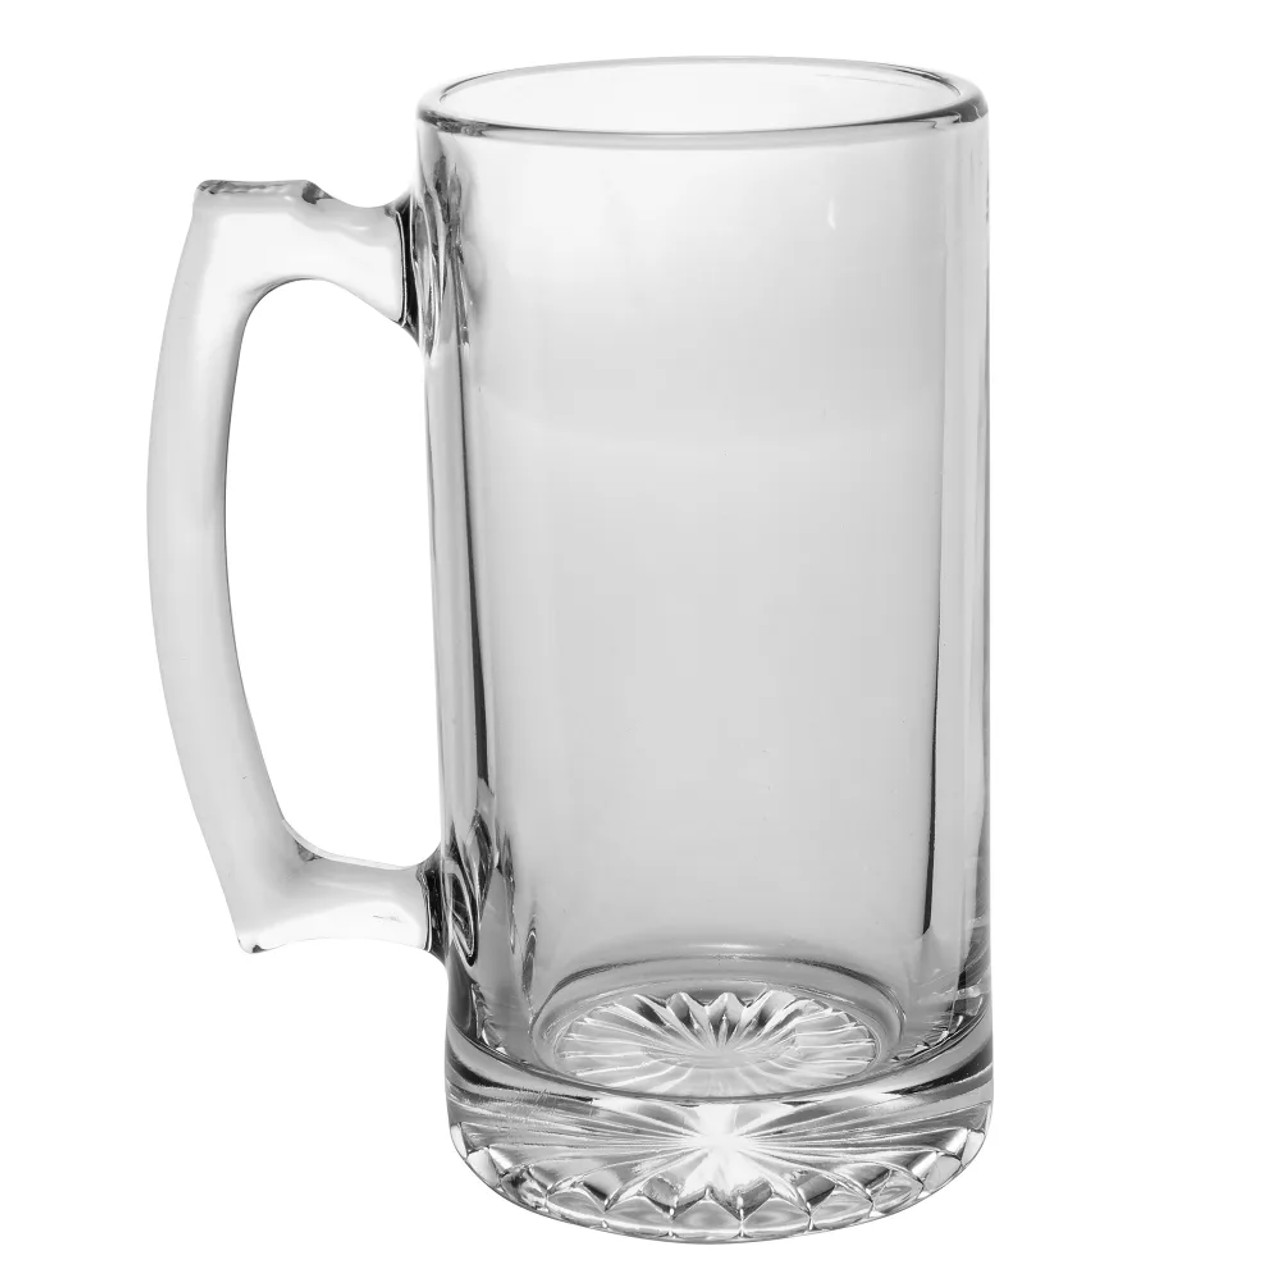 Libbey 5272 25 oz Sport Mug - Thick Clear Glass, Large Capacity (12/Case) - Chicken Pieces